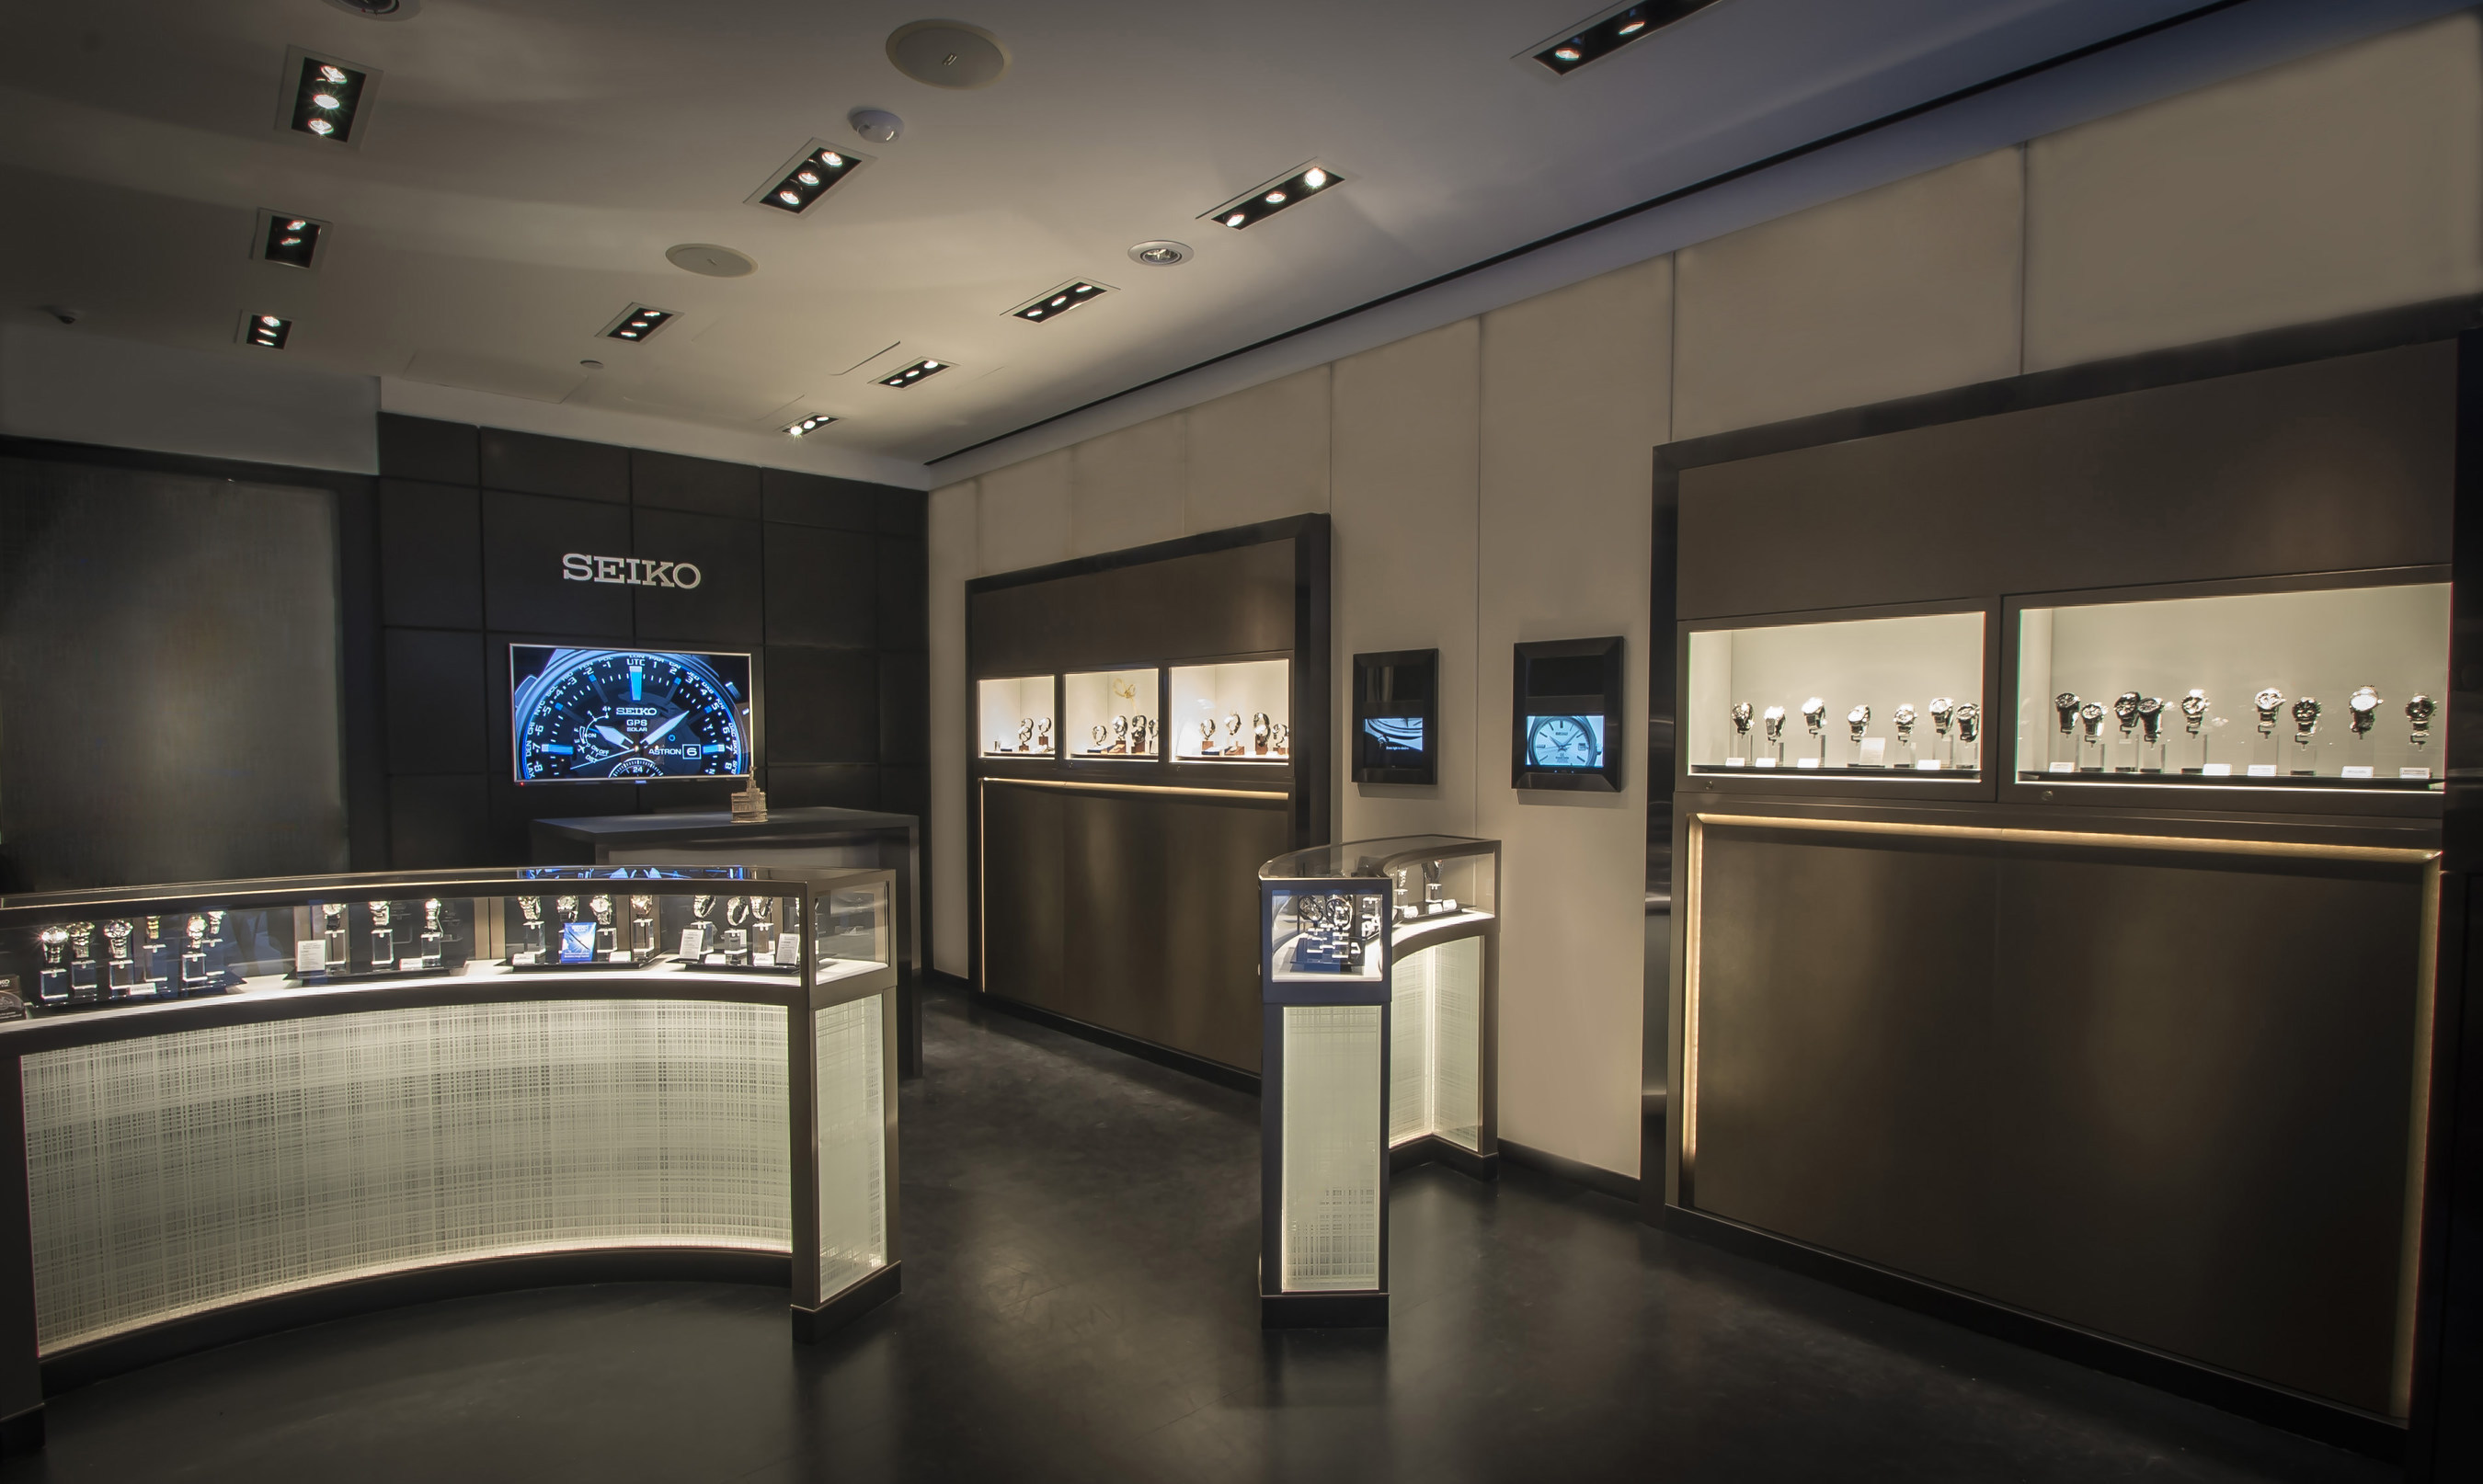 Seiko Announces Grand Opening of First Boutique in US